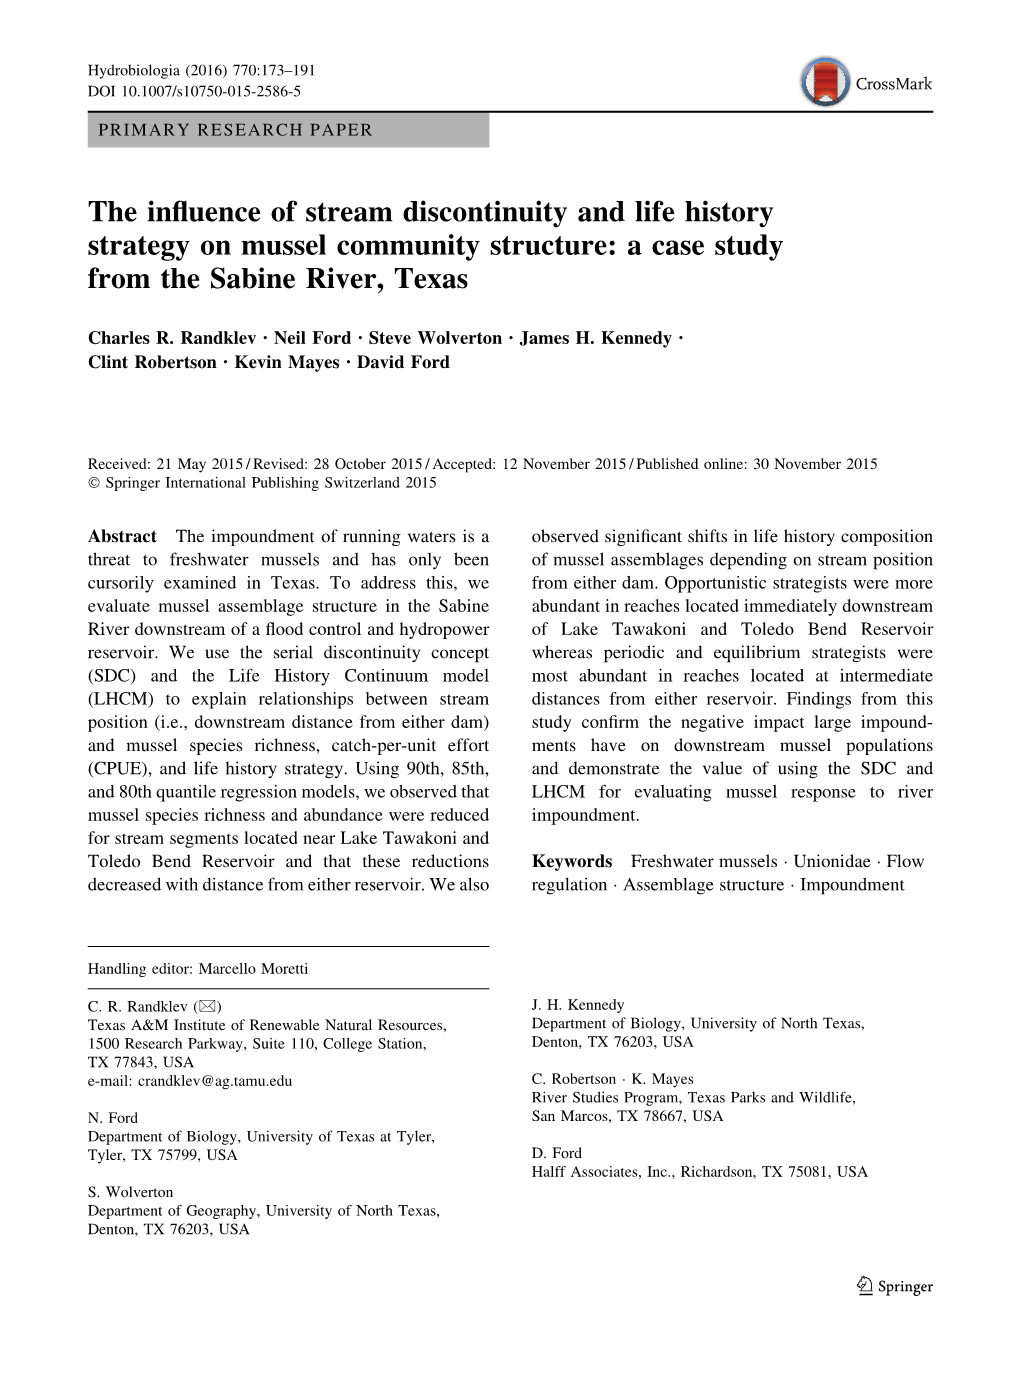 The Influence of Stream Discontinuity and Life History Strategy on Mussel Community Structure: a Case Study from the Sabine Rive